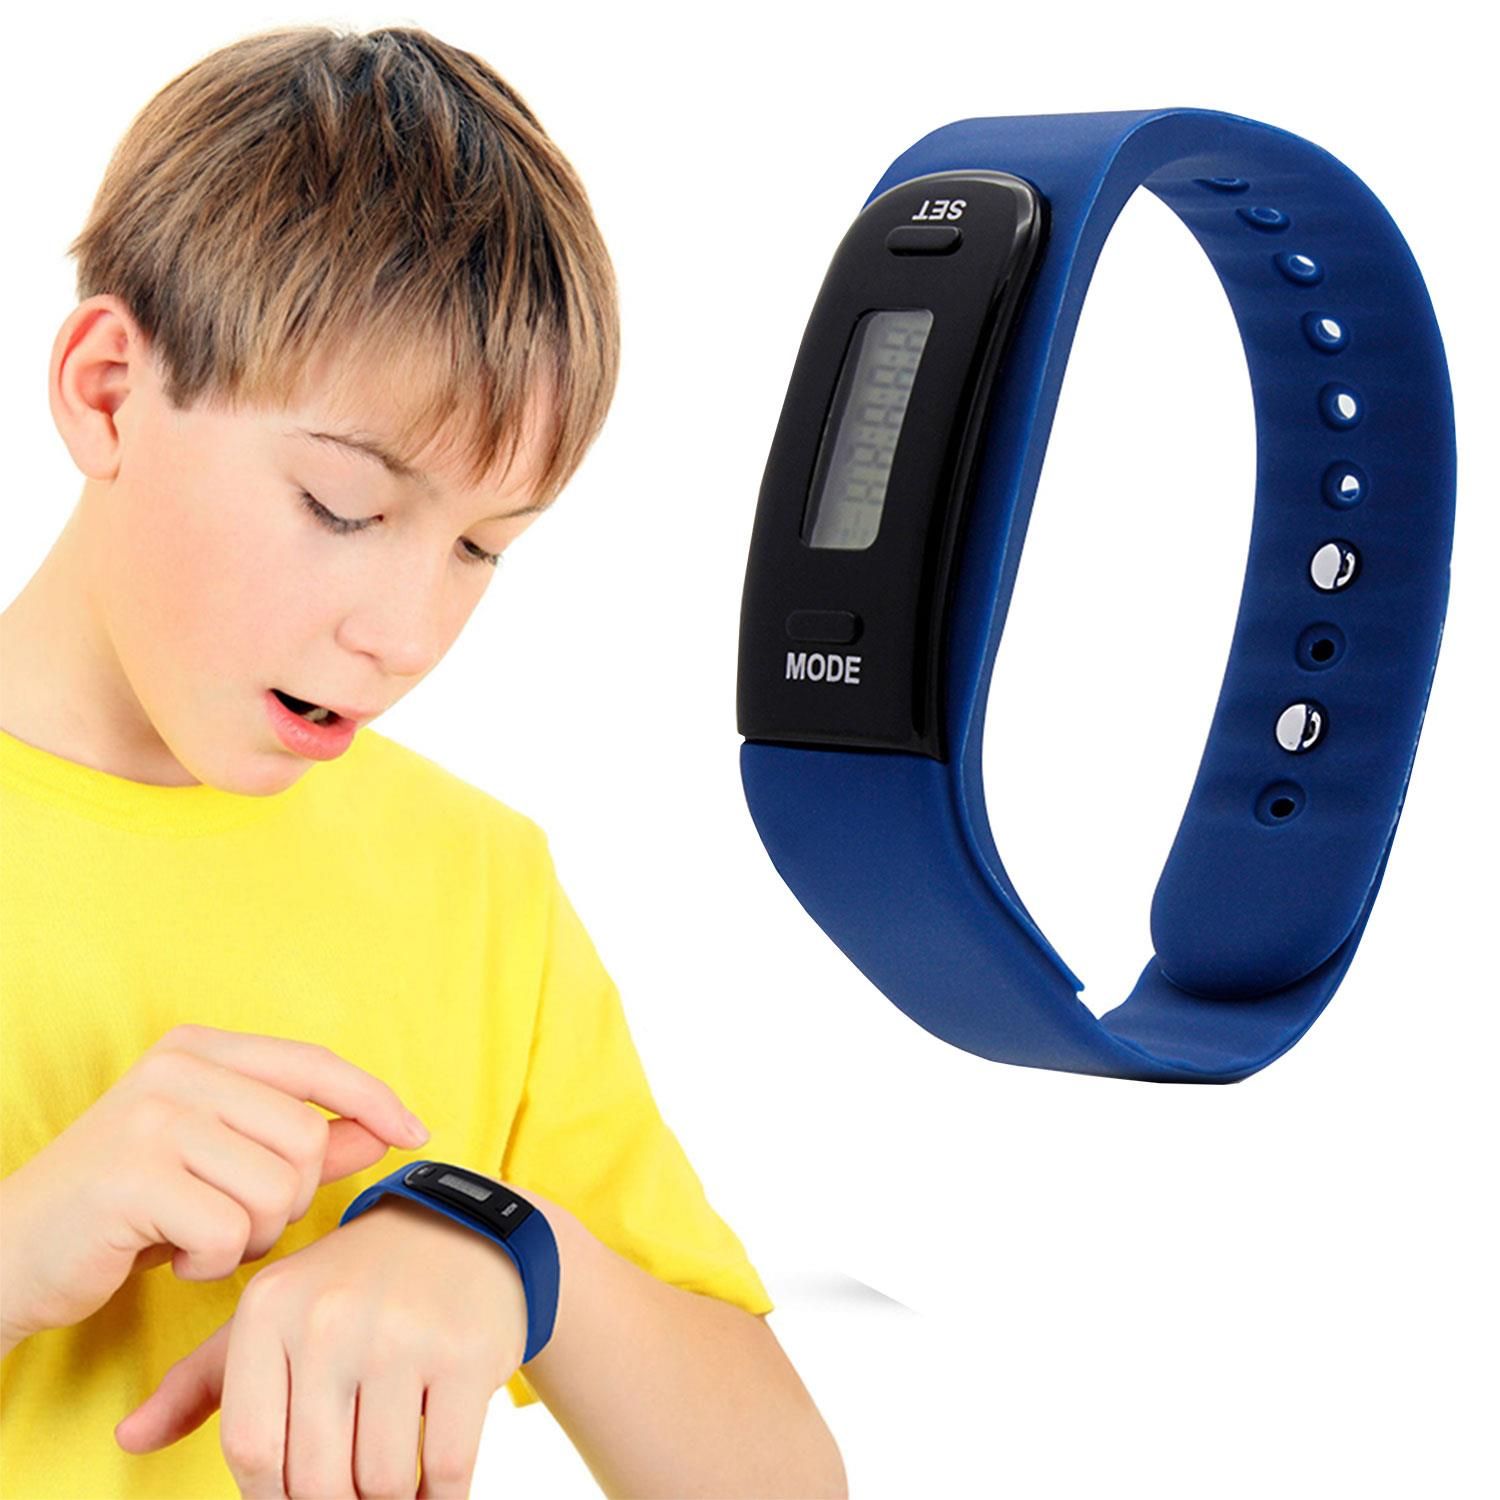 Aquarius 111 Teen Fitness Activity Pedometer Smart Wristband Tracker - Blue

Aquarius 111 is the next best thing in smartwatches for kids! With 6 colours available and a range of features like digital time display to sleep tracking, cronometer, distance and calorie display, your child will love to learn how to tell the time while keeping in track of his daily activities.


Key Features : 
Pedometer, Distance, Calories, Sports Time, Sports Speed, Setting (Year, Month, Date, Time and Personal information).
The pedometer is a non-Bluetooth, non APP and no smartphone needed design, a simple but powerful pedometer. 
It is very easy to use, the perfect gift for your kids, parents, family, friends.
High-performance button battery last between 1-2 years, So it means that it can't be charged.
Technical Specifications :
Working Voltage: 1.5V
Working Current: 11-3uA
Display Screen: LCD 0.69’’ E-link Display
Battery: Button cell battery AG3/LR41
Waterproof Grade: IP56
Product Specifications:
Brand: Aquarius 
Materials: Rubber
Model: AQ111
Weight: 42g
Display: LED Display
Product Dimensions: 8x9x3cm
Package Includes: 1x Aquarius AQ 111 Teen Fitness Activity Tracker